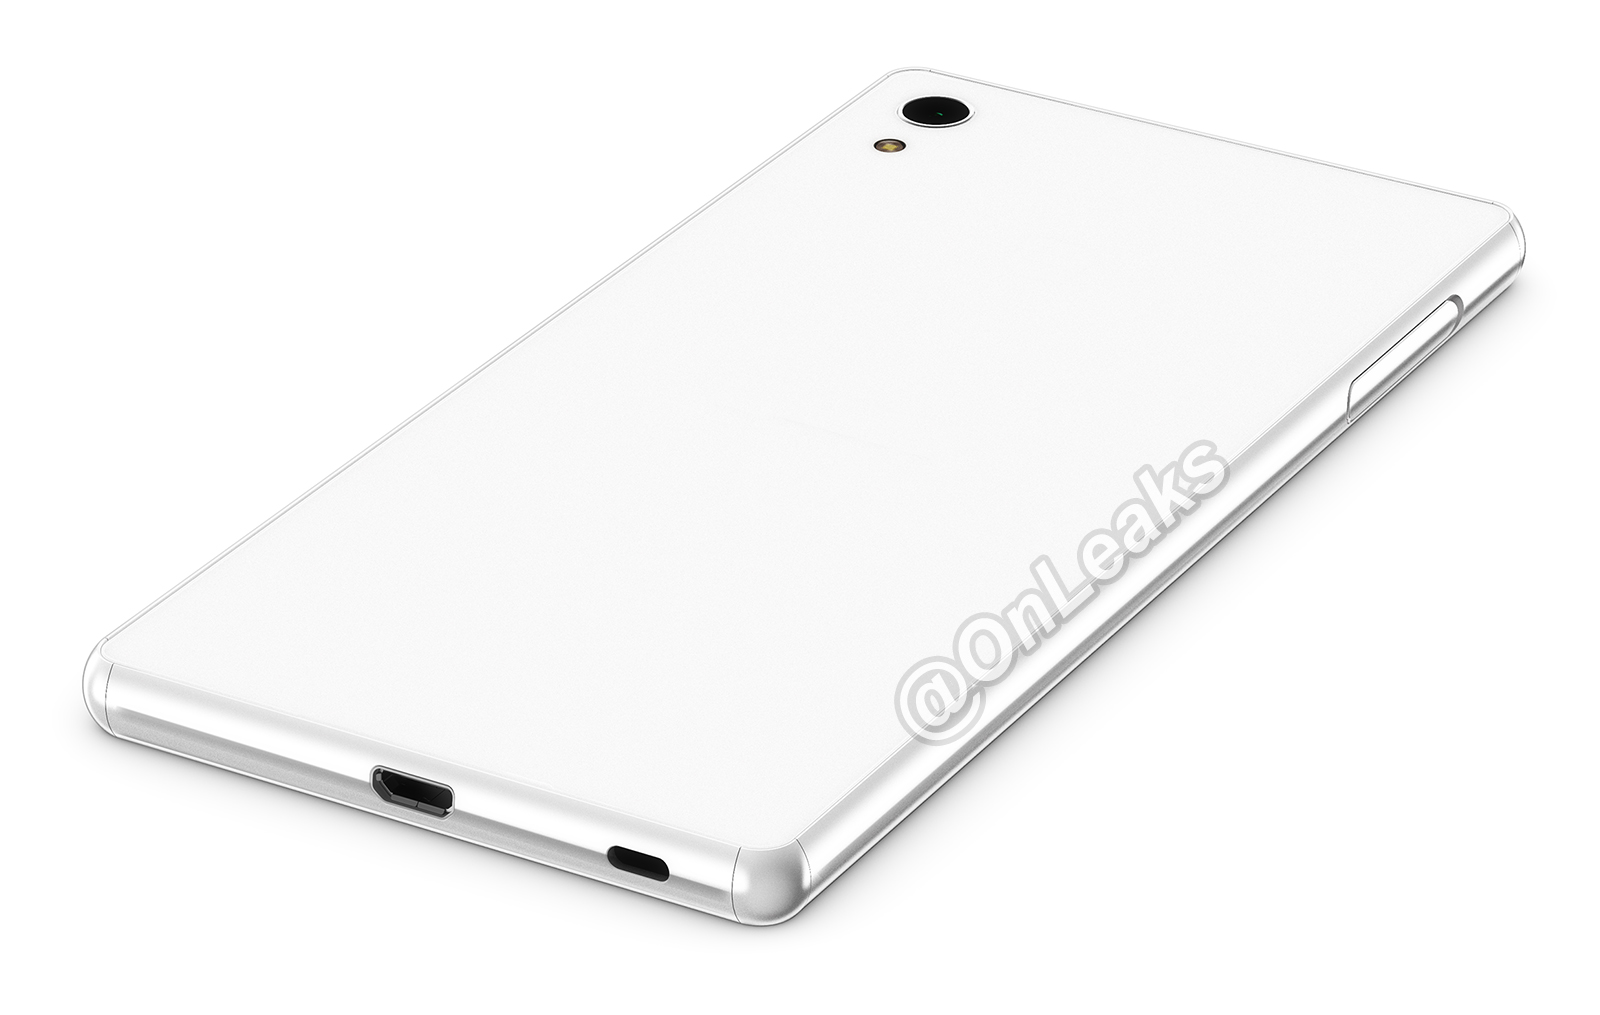 Alleged Sony Xperia Z4 non final renders